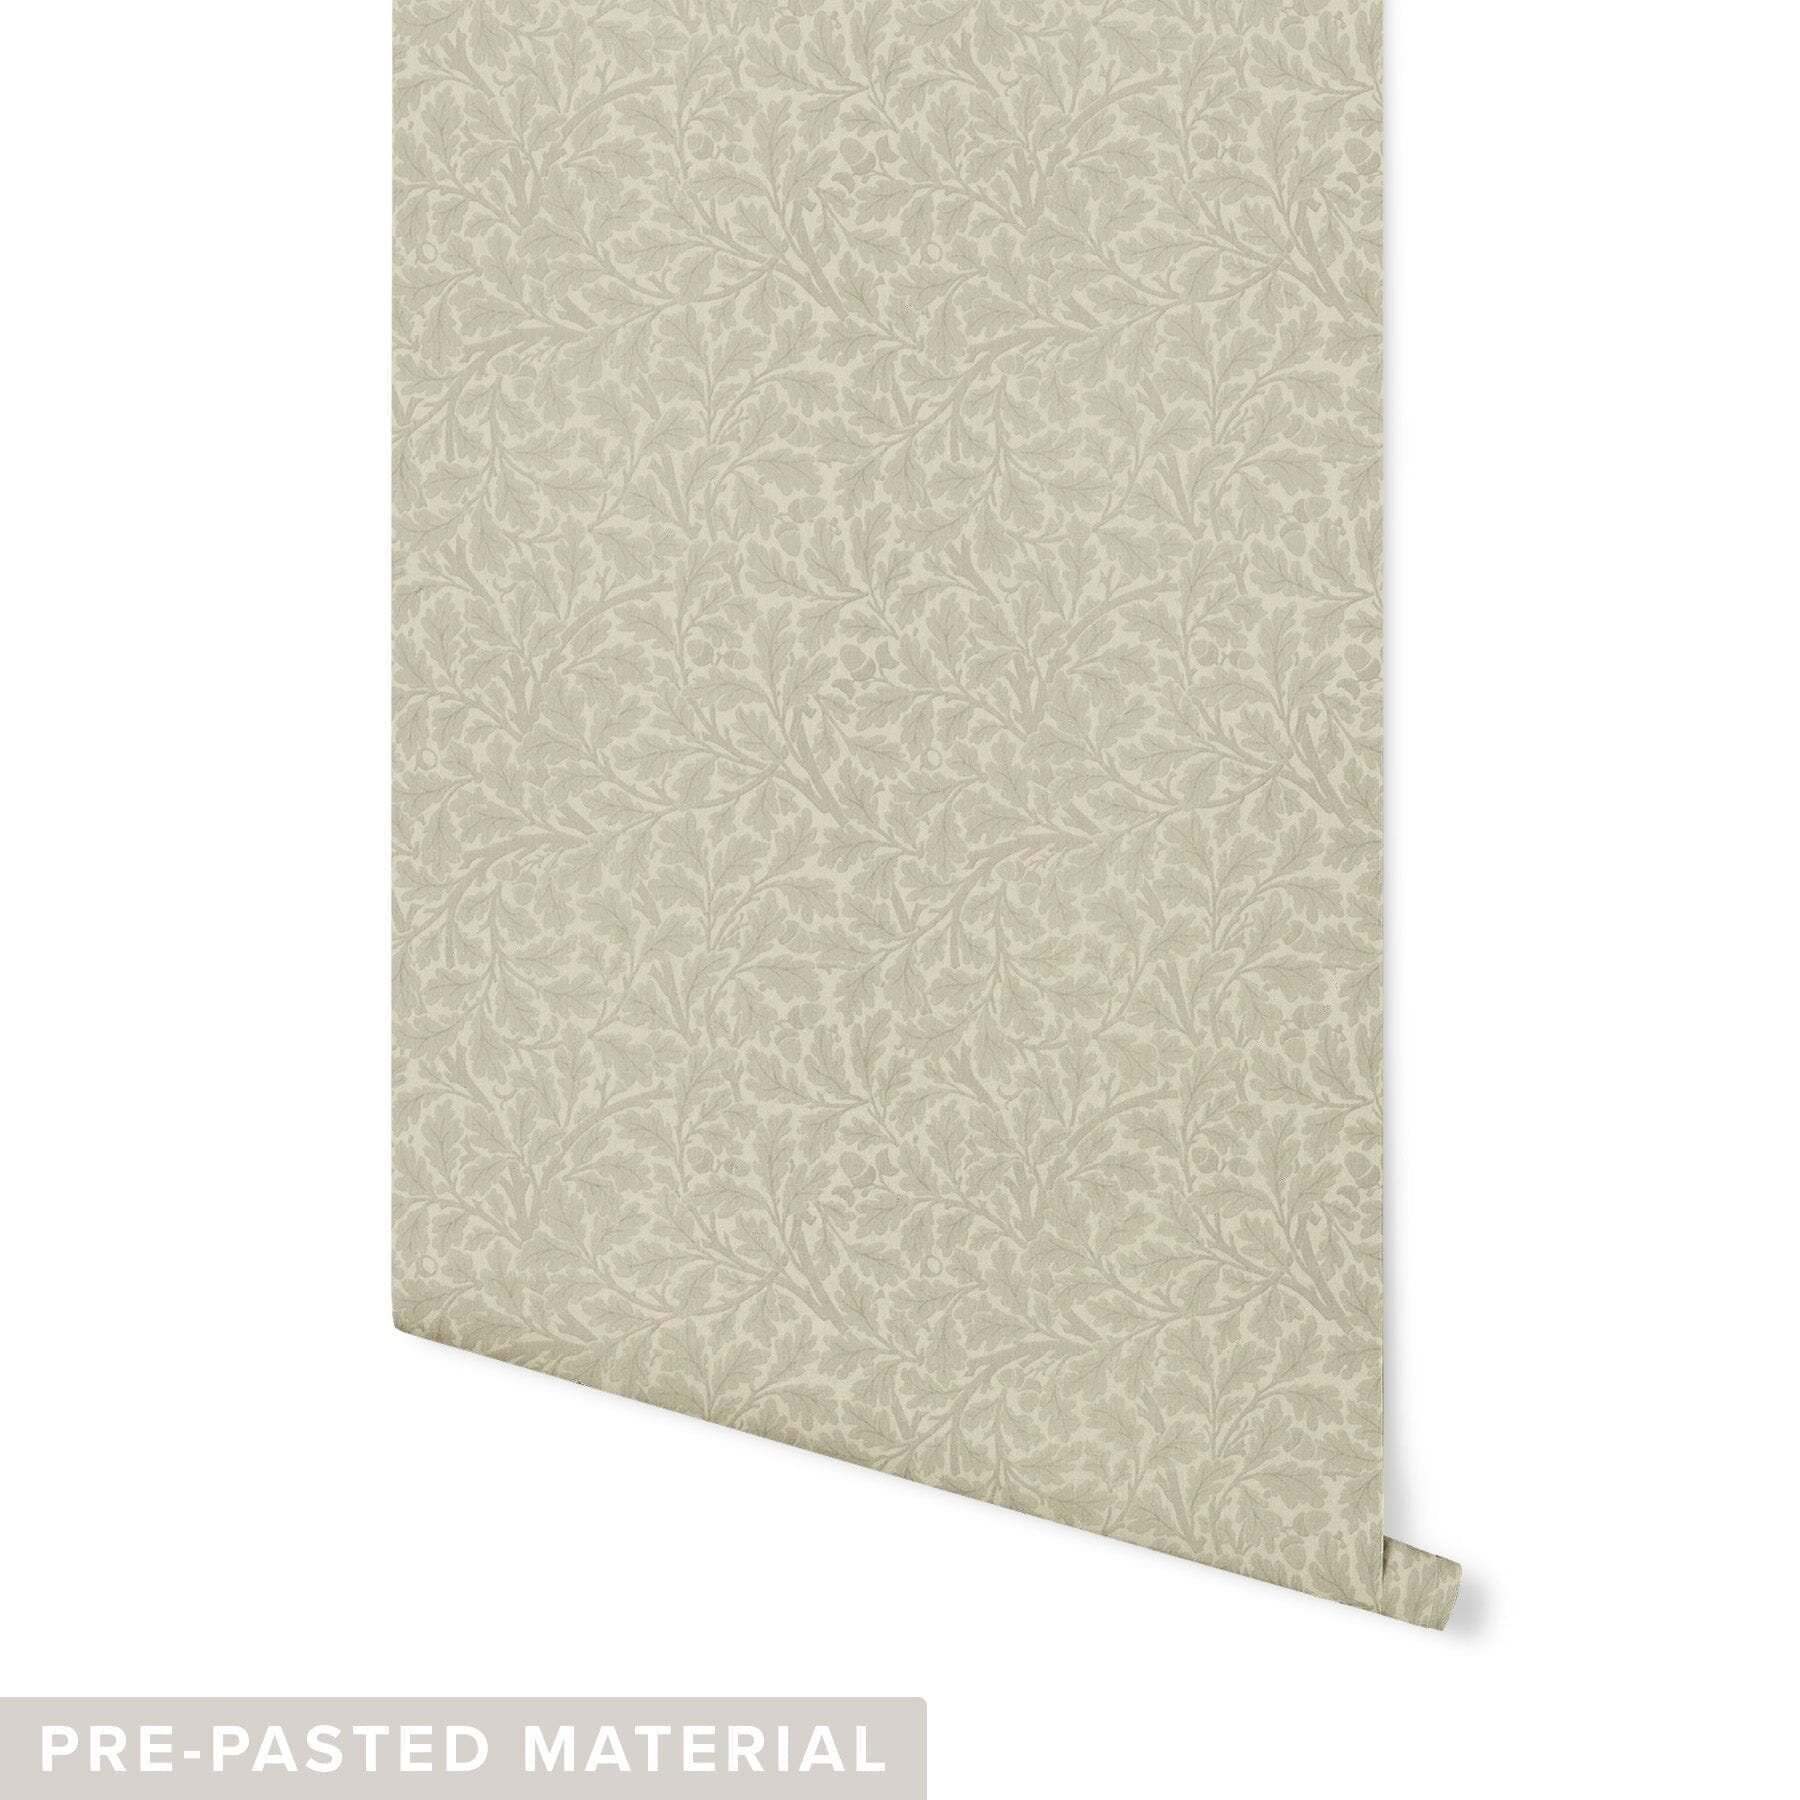 Oak Tree Wallpaper Wallpaper Mia Parres Pre-pasted Mineral Yellow DOUBLE ROLL : 46" X 4 FEET